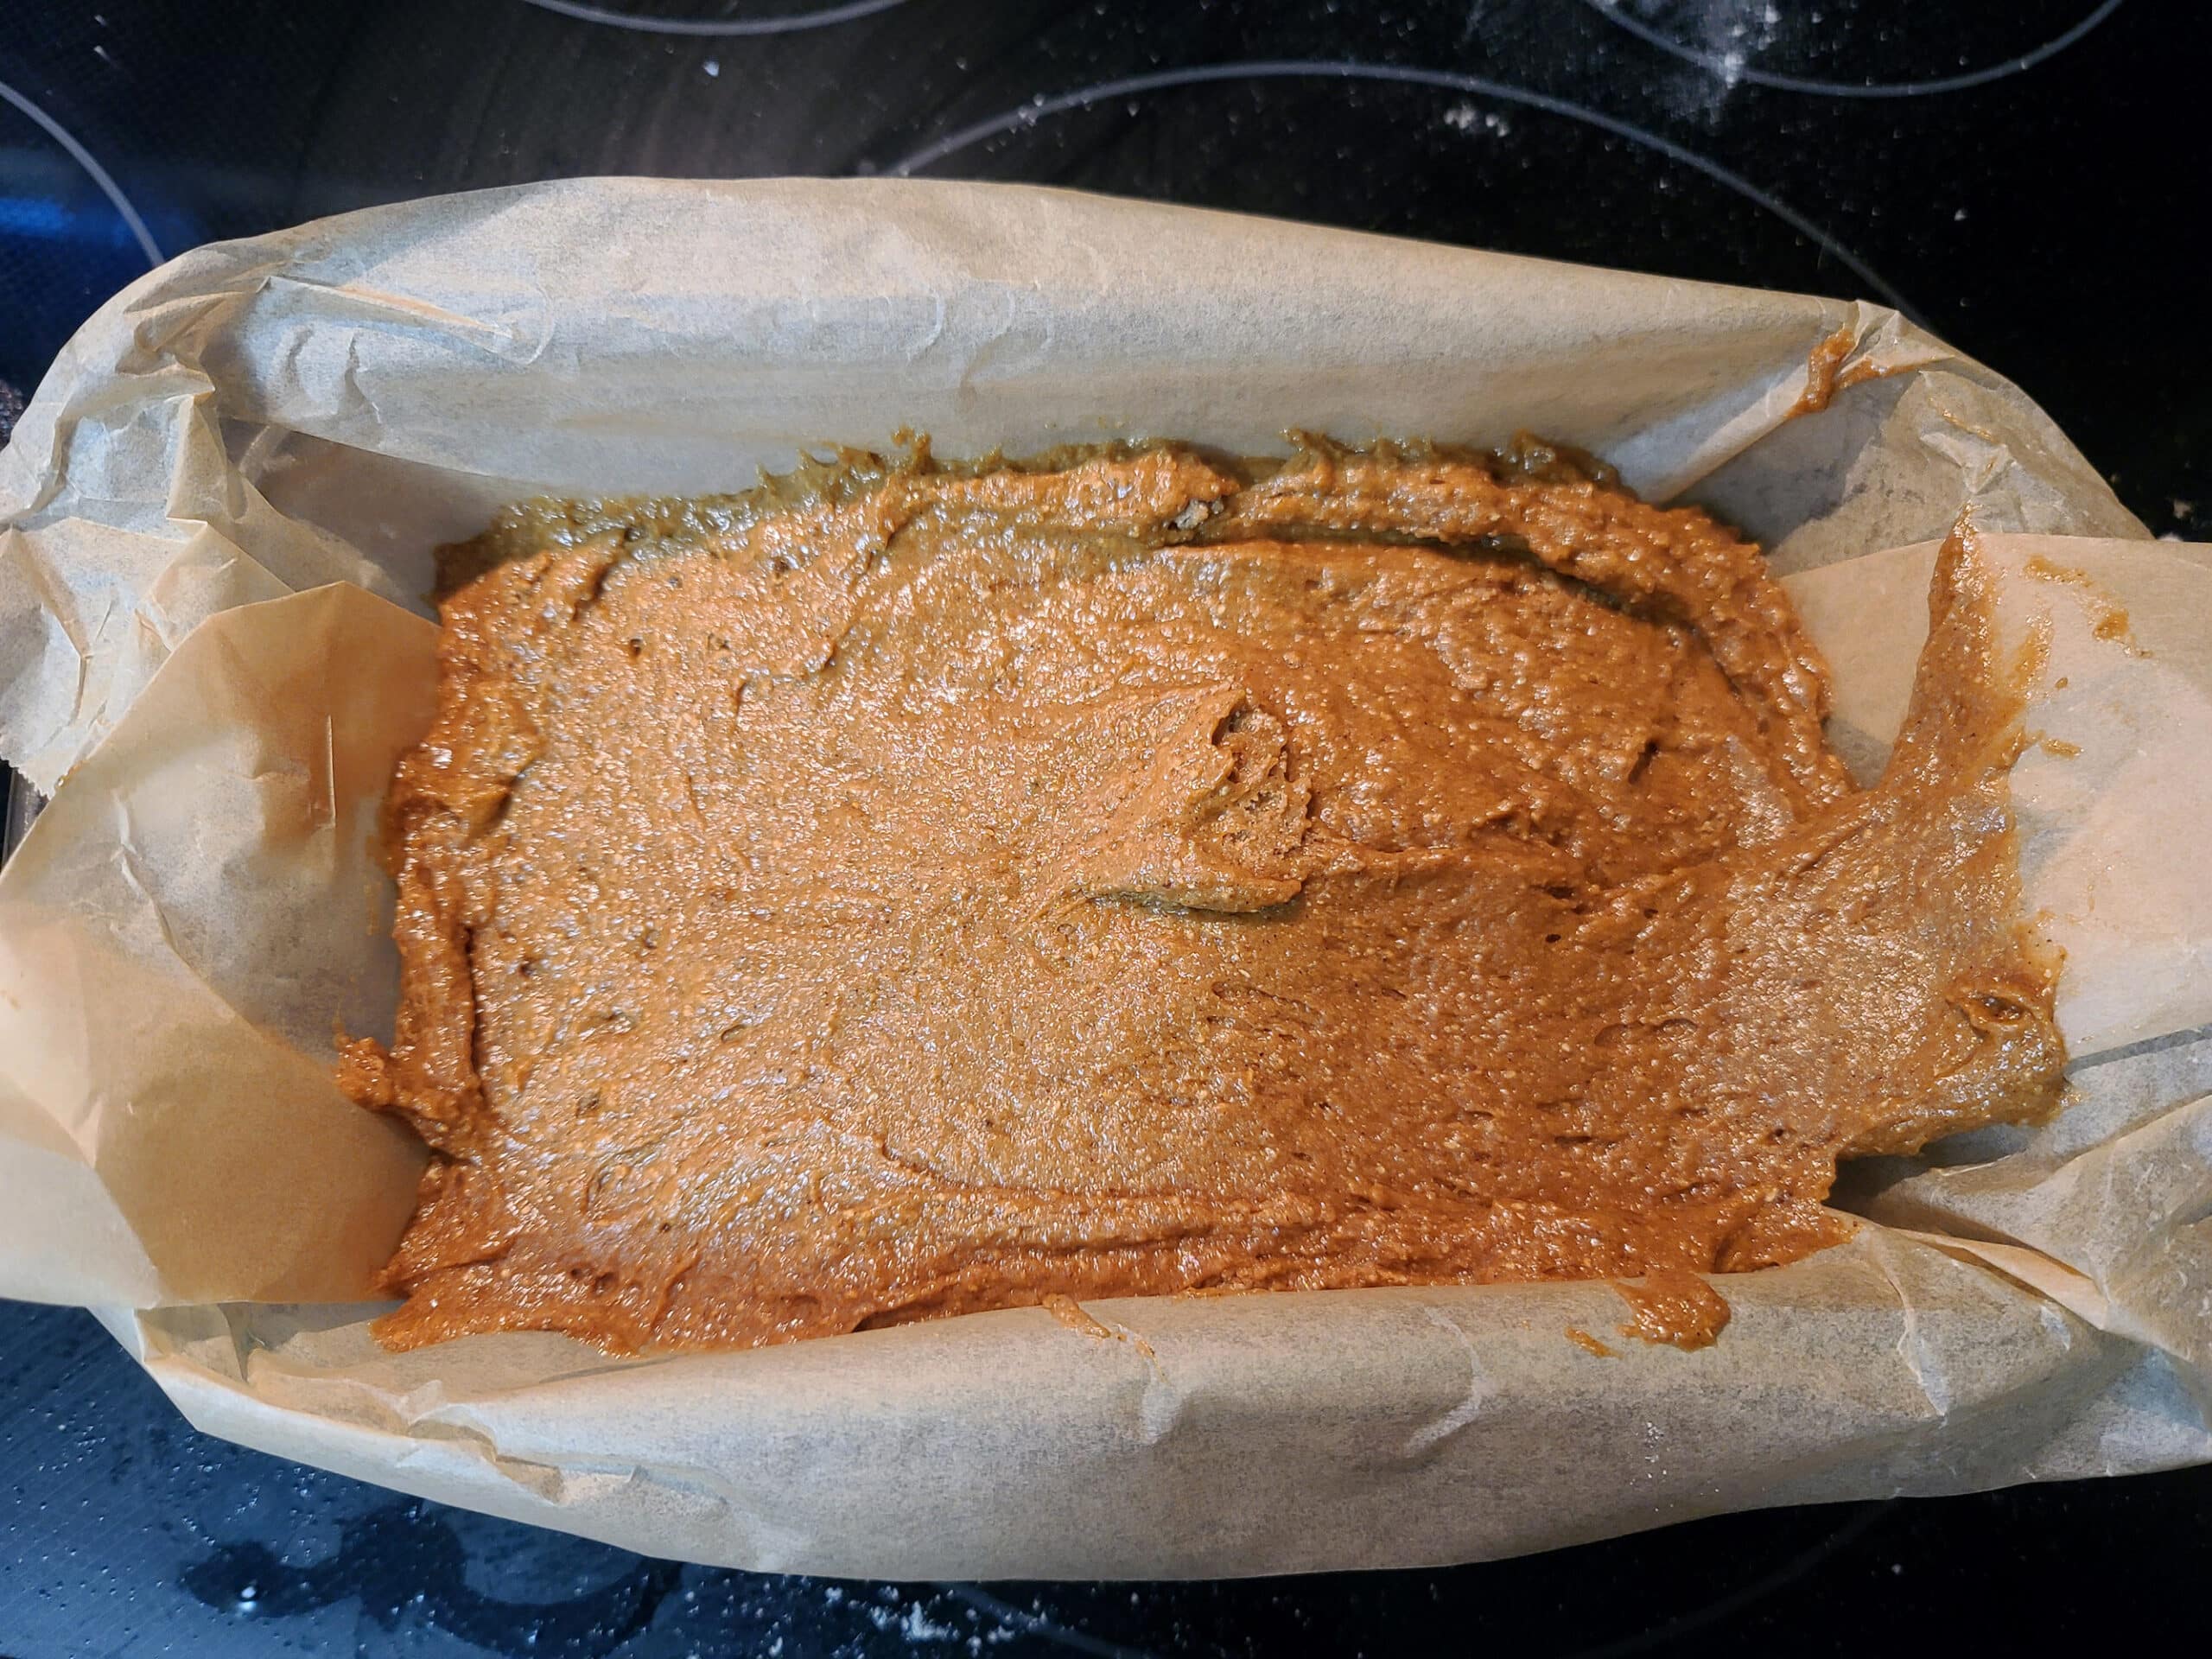 The gluten free gingerbread batter being spread in the prepared loaf pan.